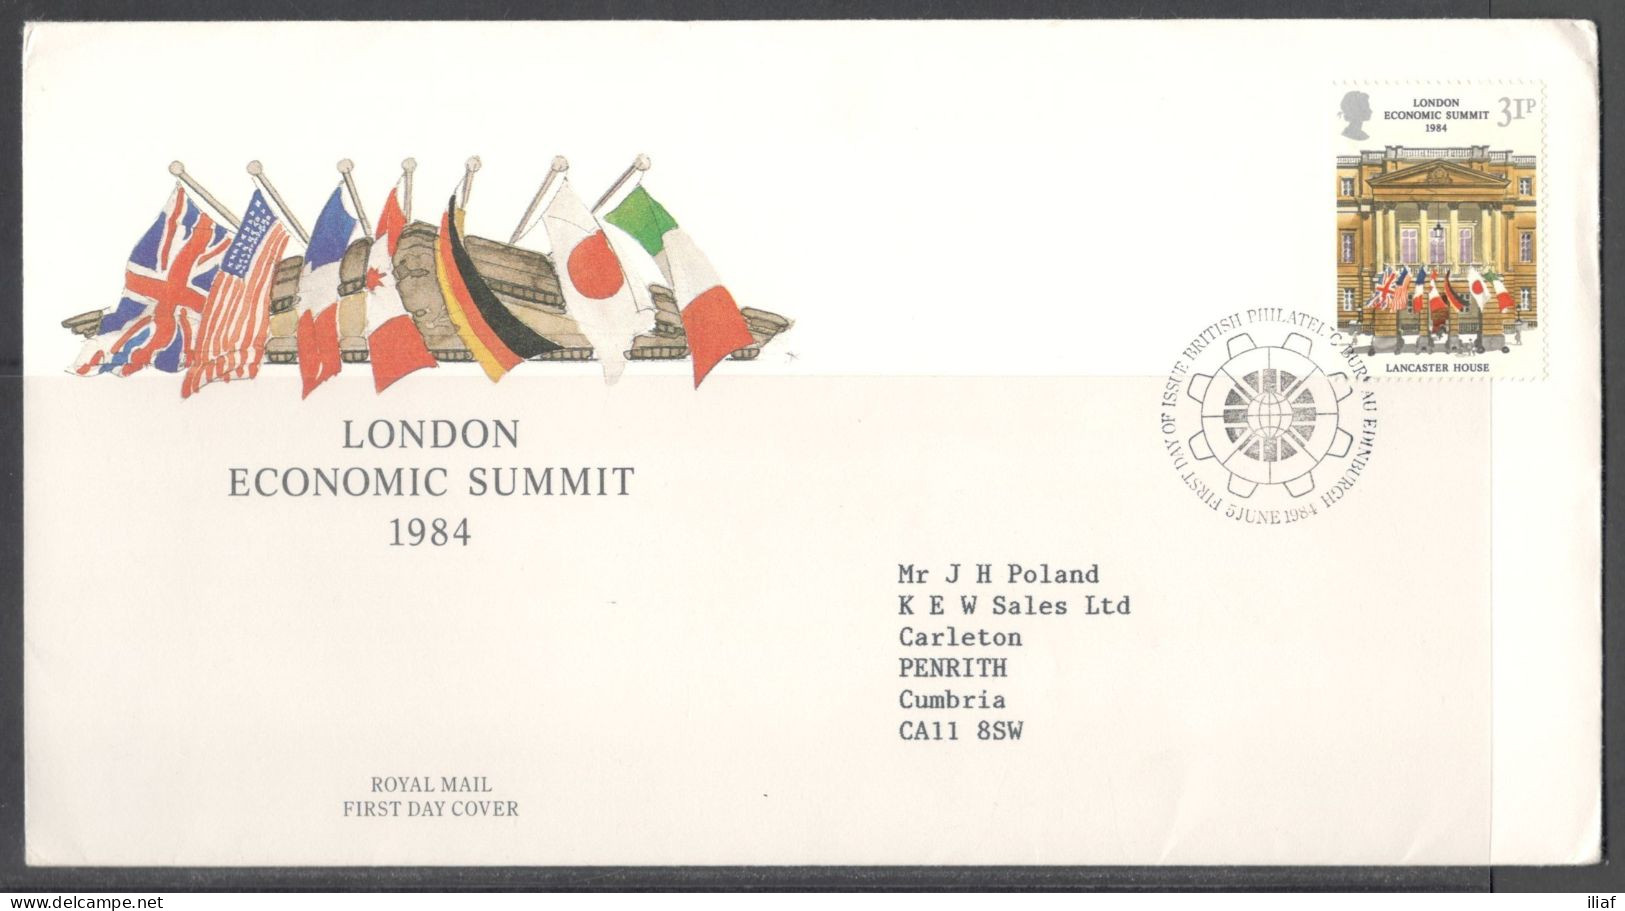 United Kingdom Of Great Britain.  FDC Sc. 1057.  London Economic Summit Conference. Lancaster House  FDC Cancellation - 1981-1990 Em. Décimales